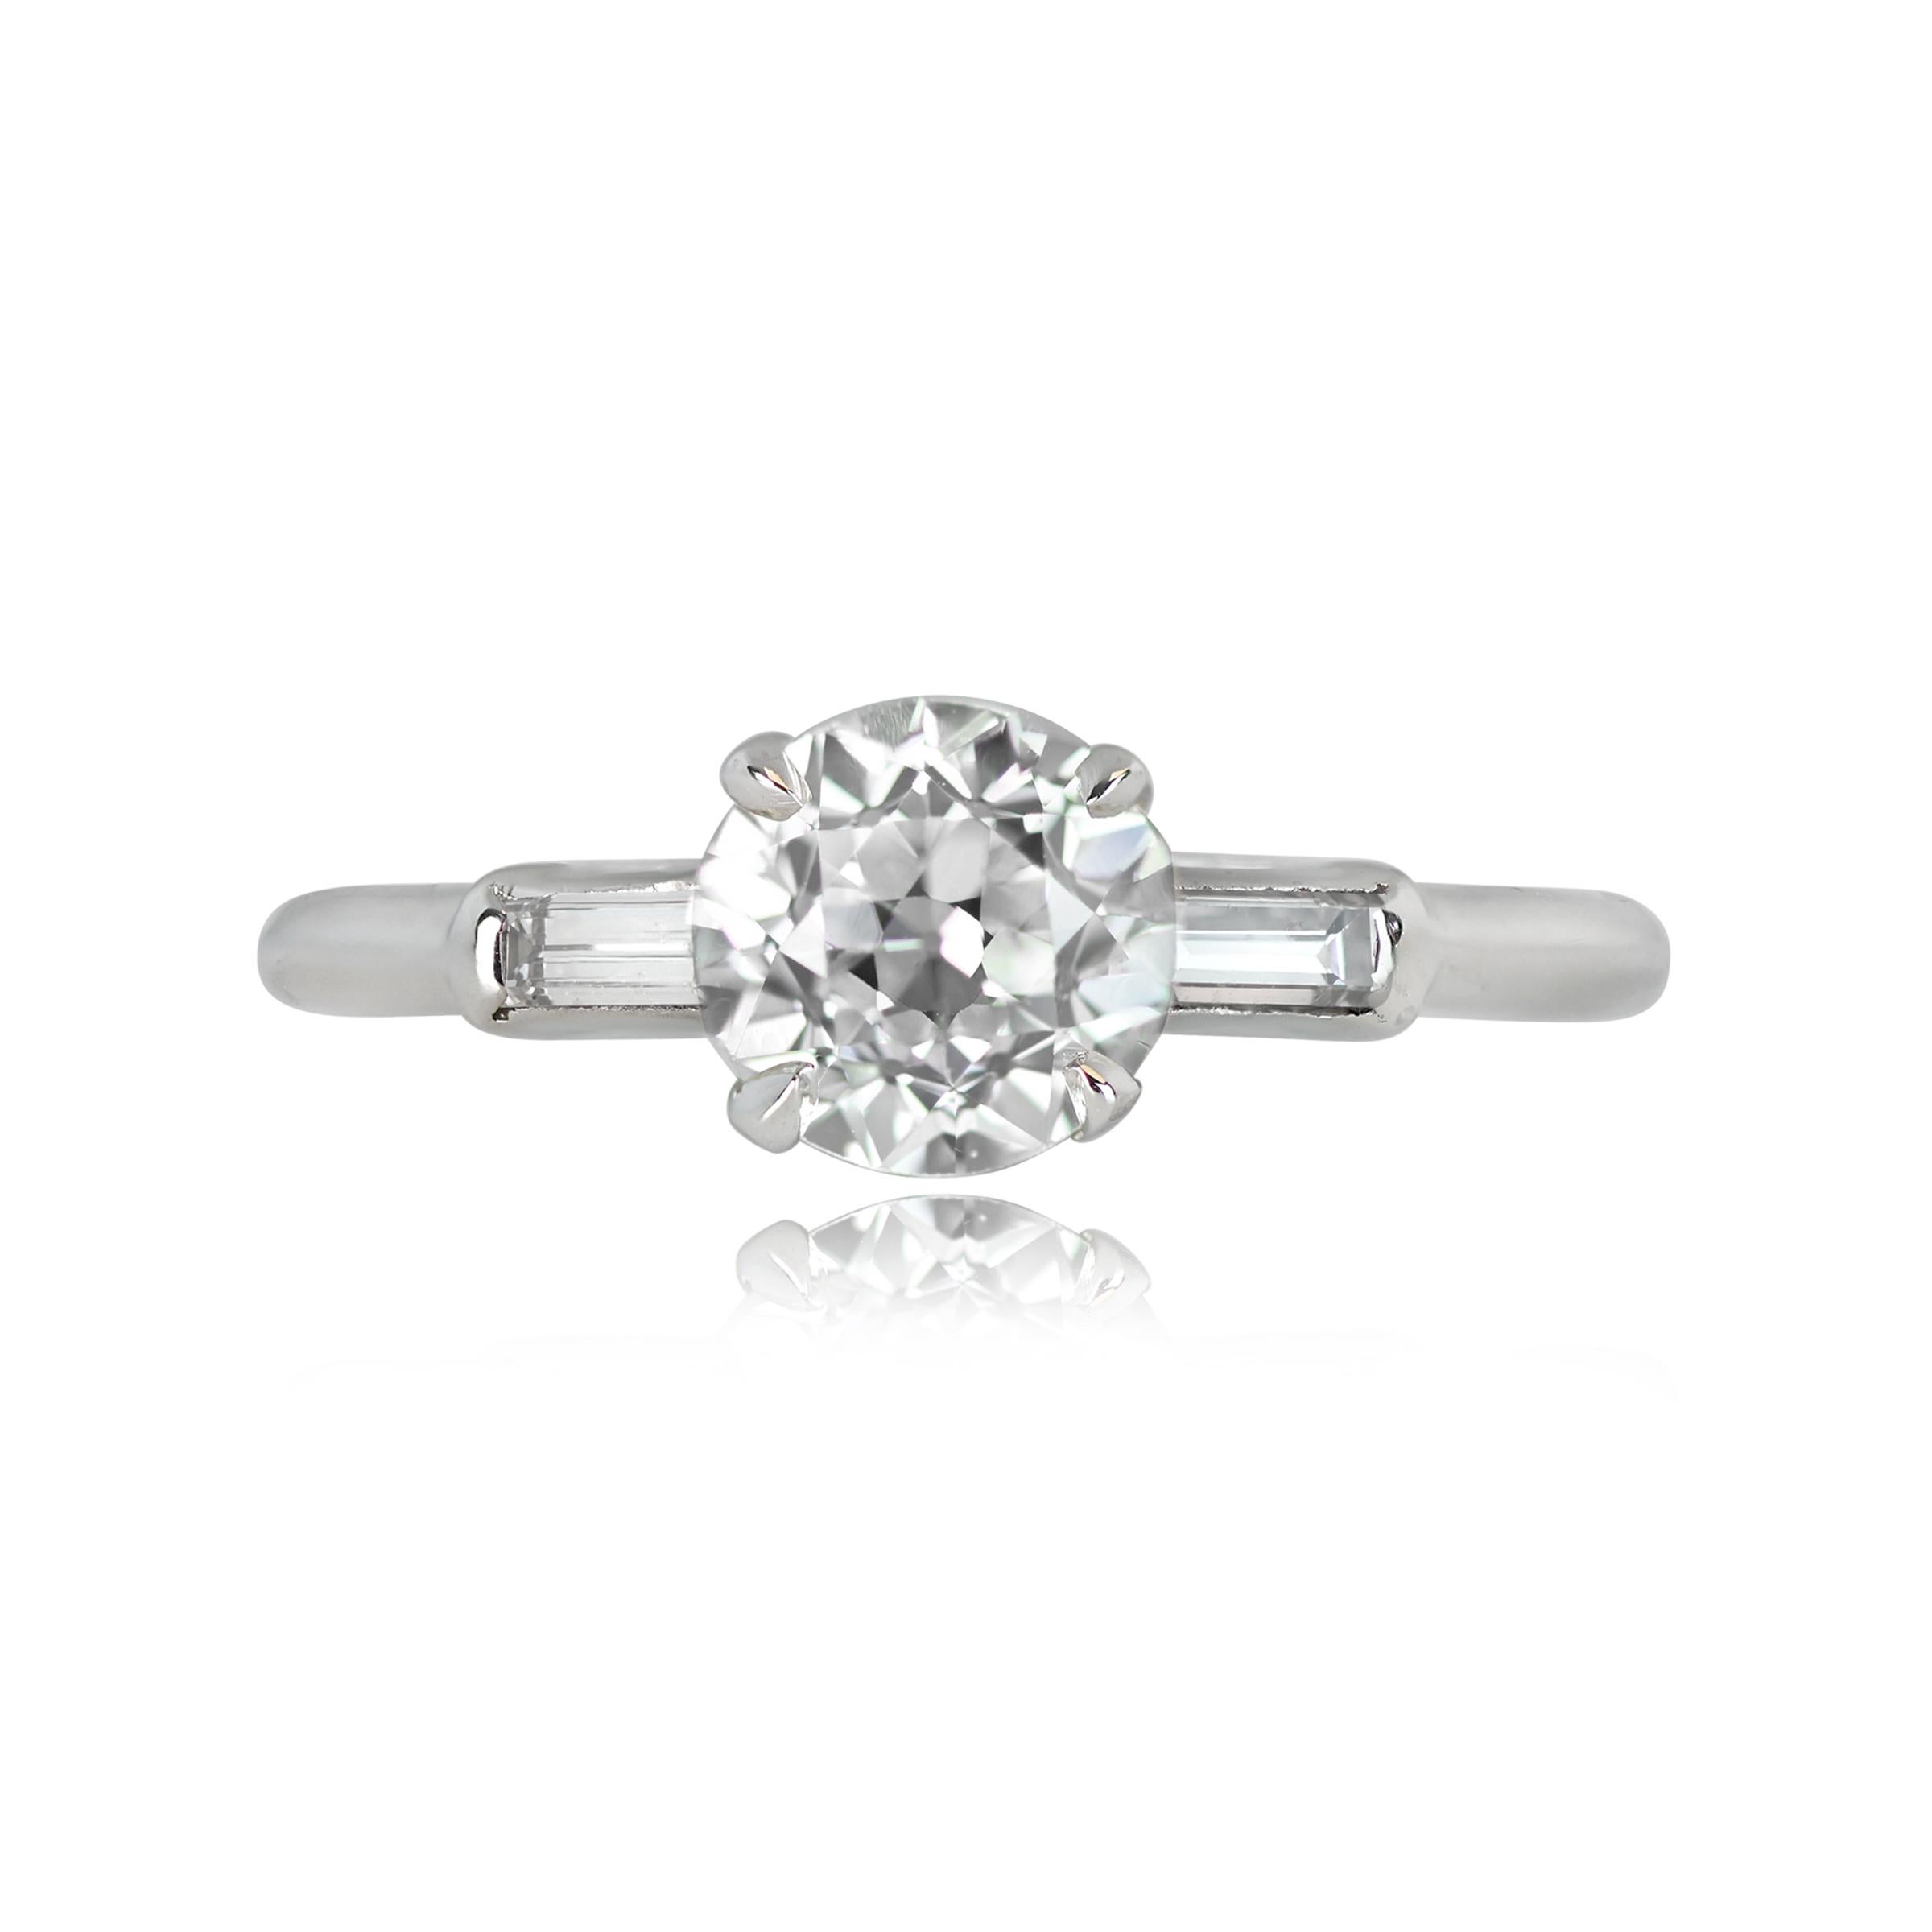 A vintage platinum ring boasts a GIA-certified 1.08-carat old European cut diamond, characterized by J color and VS2 clarity. The center stone takes its place securely set within prongs, while two elegant baguette-cut diamonds grace the shoulders,